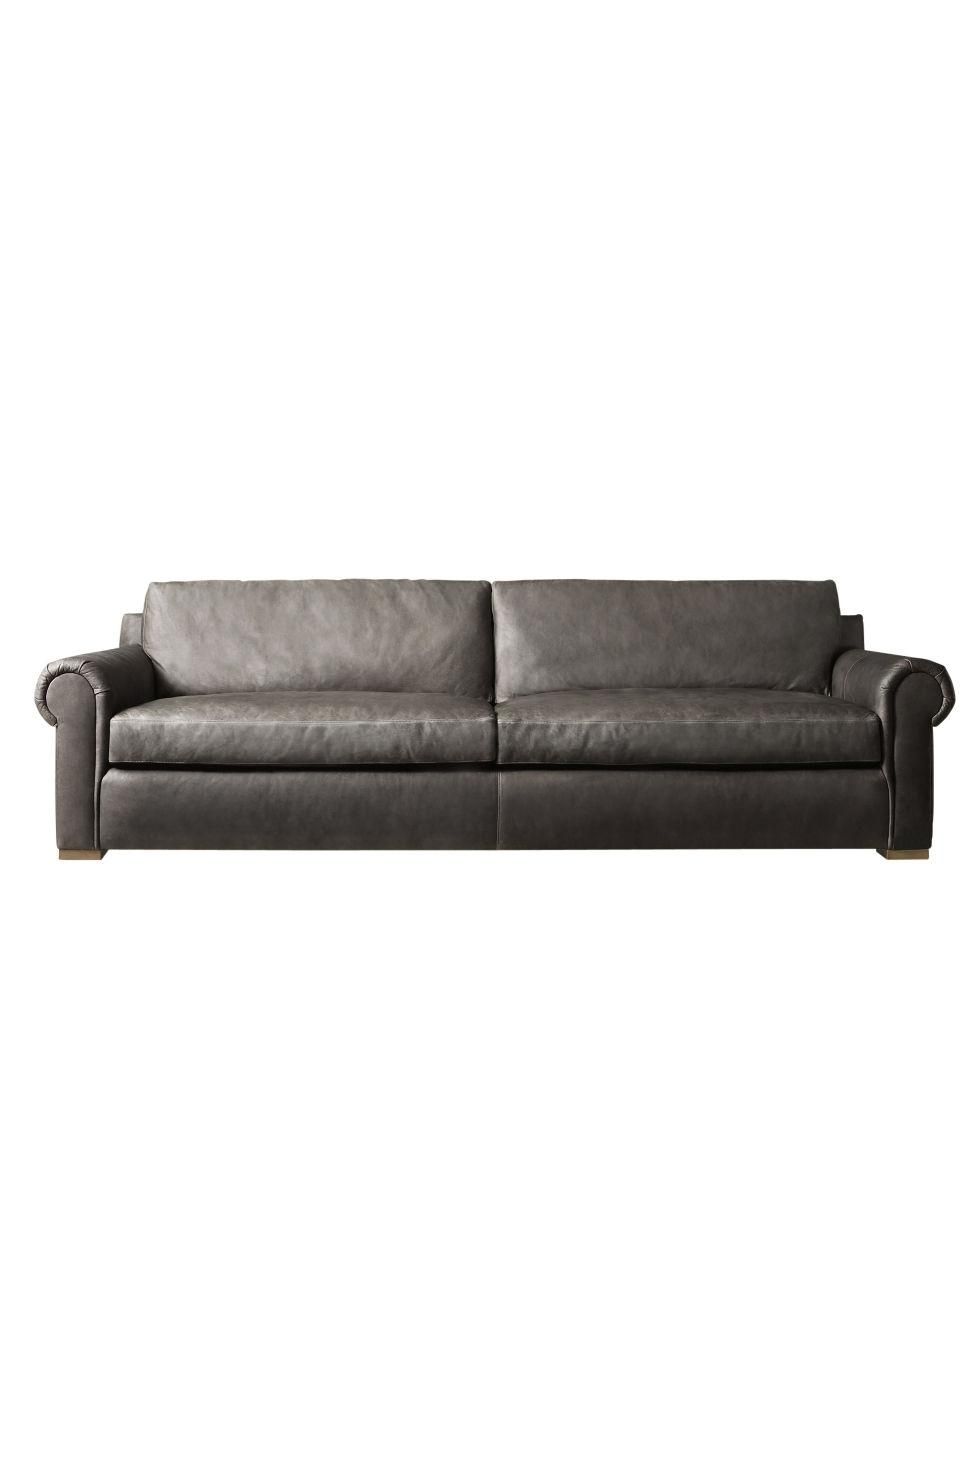 13 Best Cheap Sofas Under $3000 – Top Inexpensive Couches For Cobble Hill Sofas (View 20 of 20)